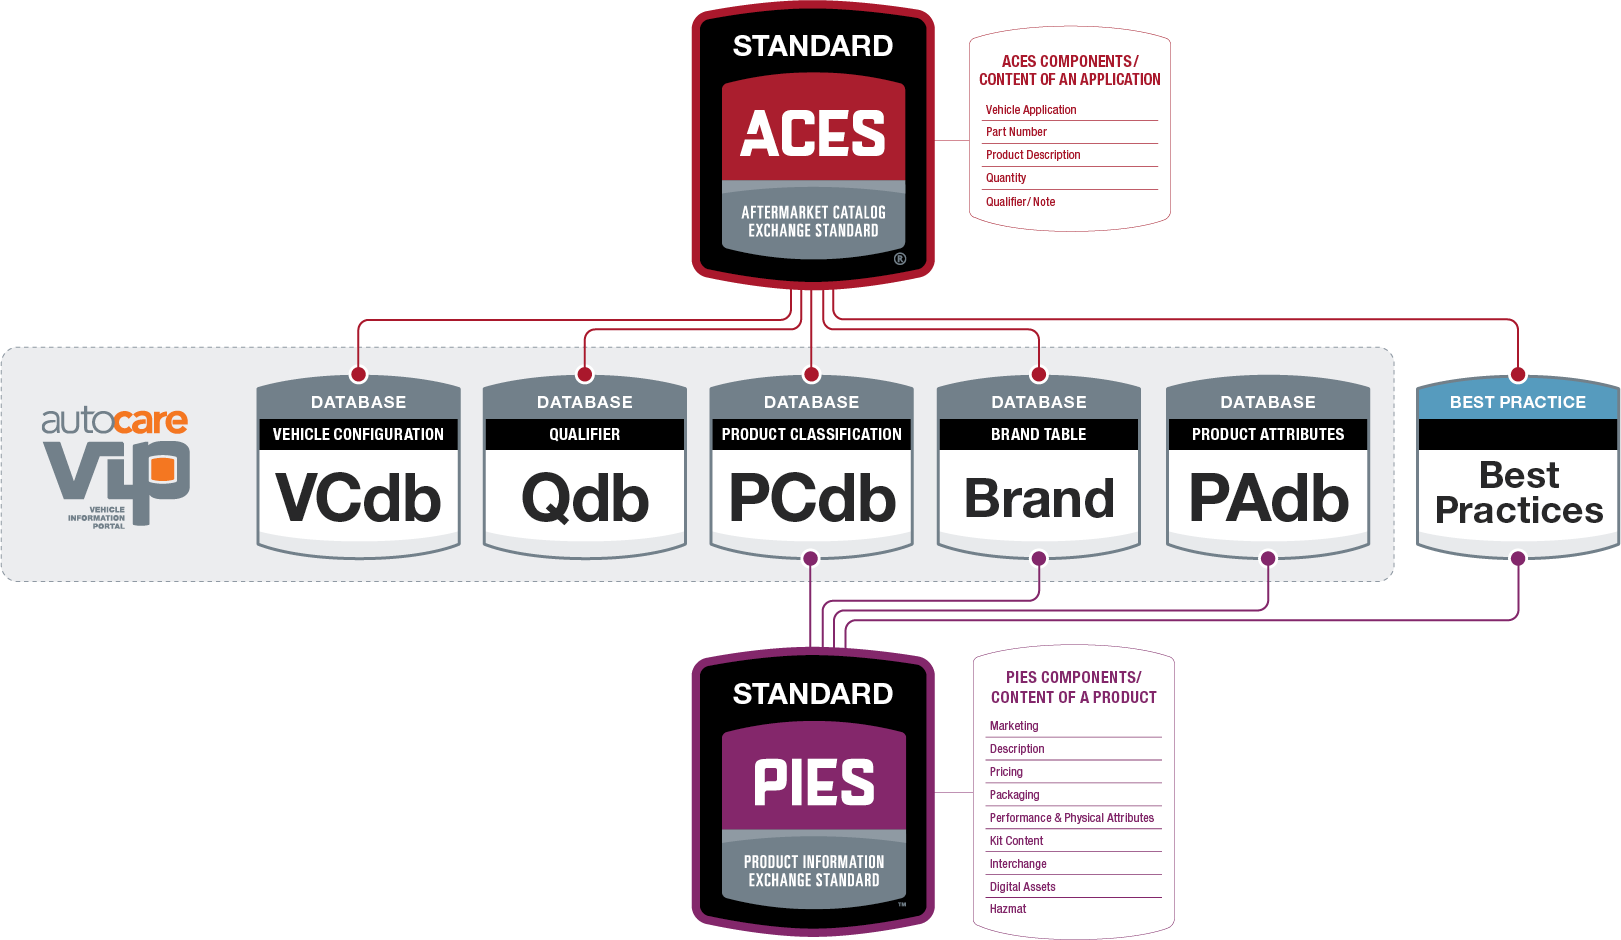 ACES and PIES data infographic